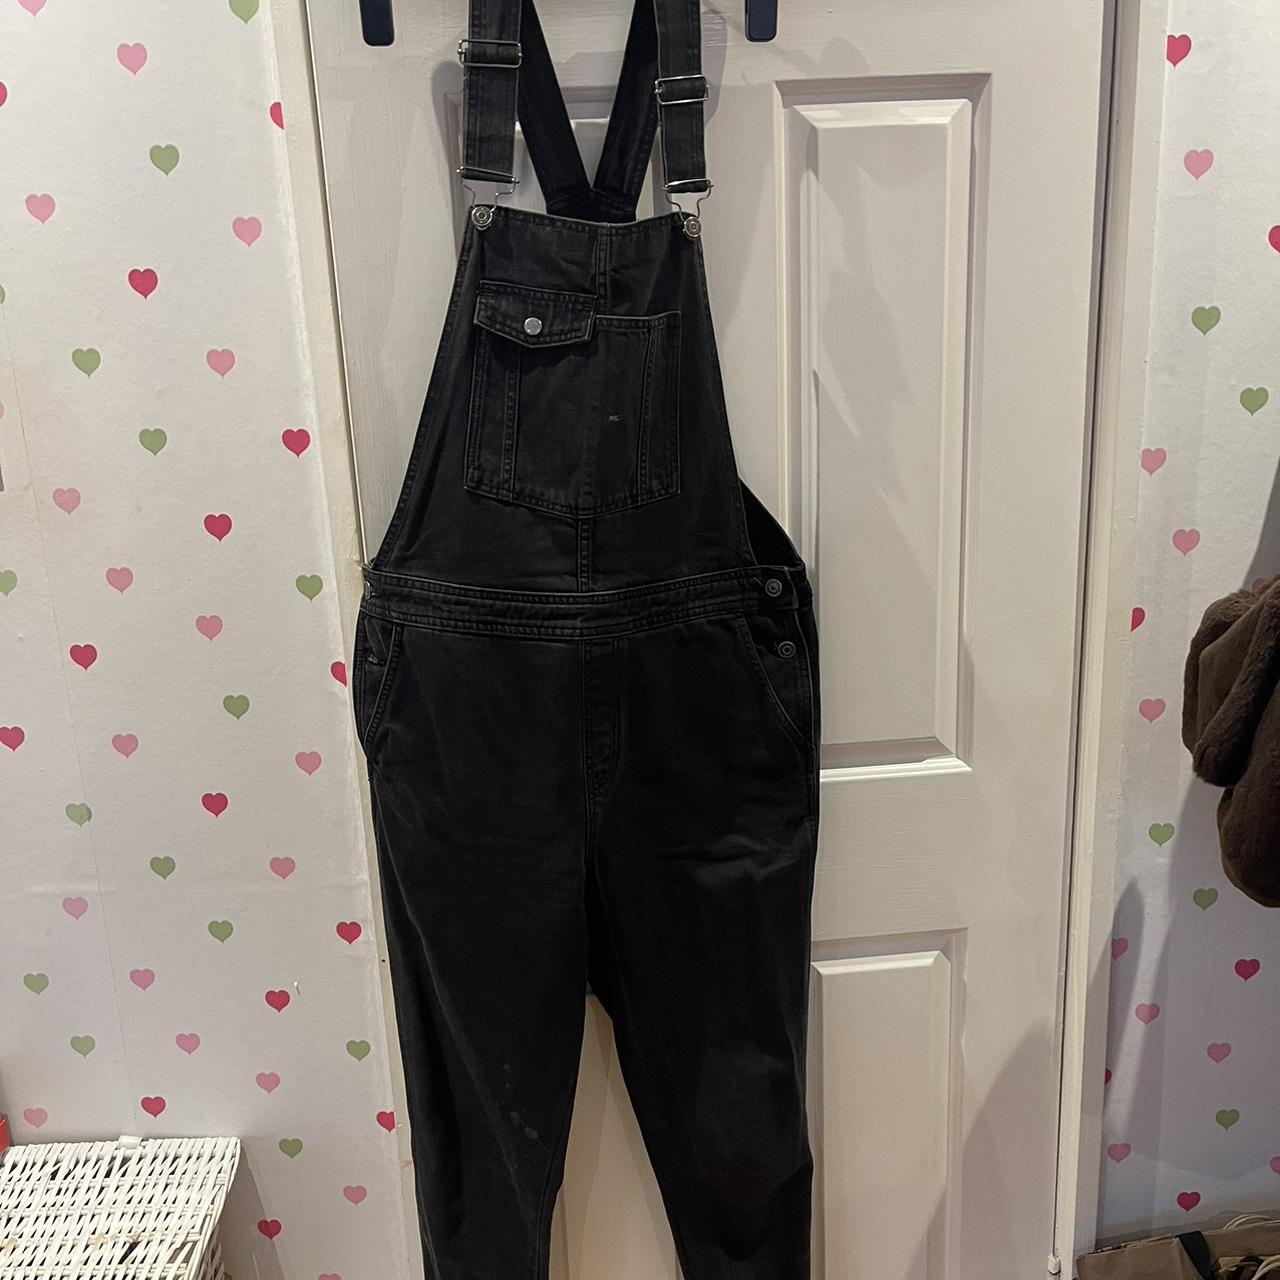 TopShop Black Overall Dress | Denim overall dress, Overall dress, Outfits